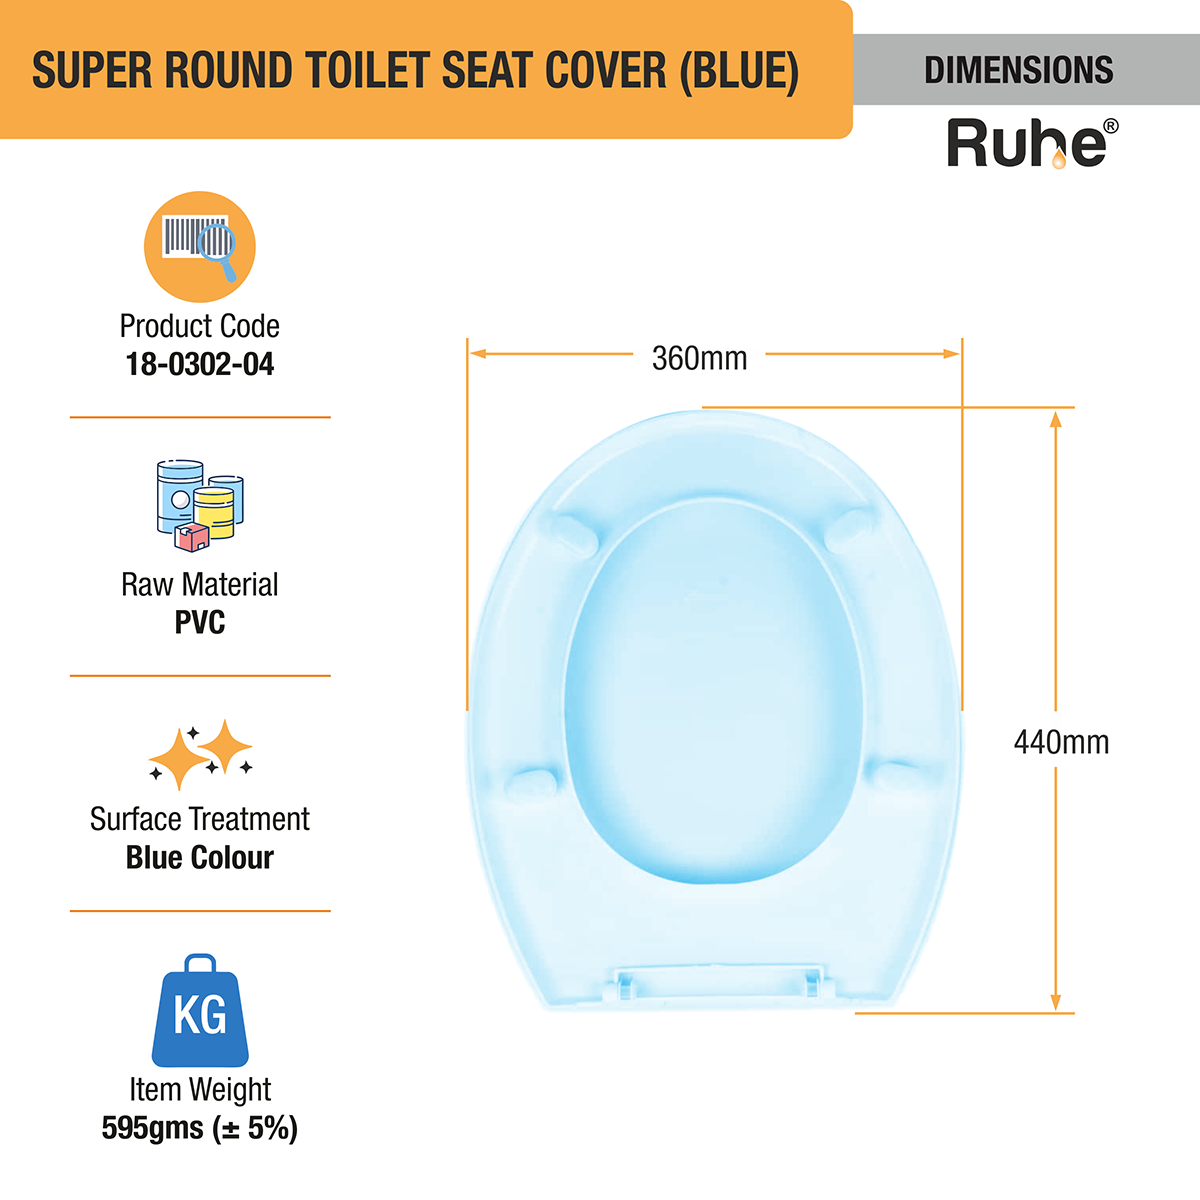 Super Round Toilet Seat Cover (Blue) dimensions and sizes